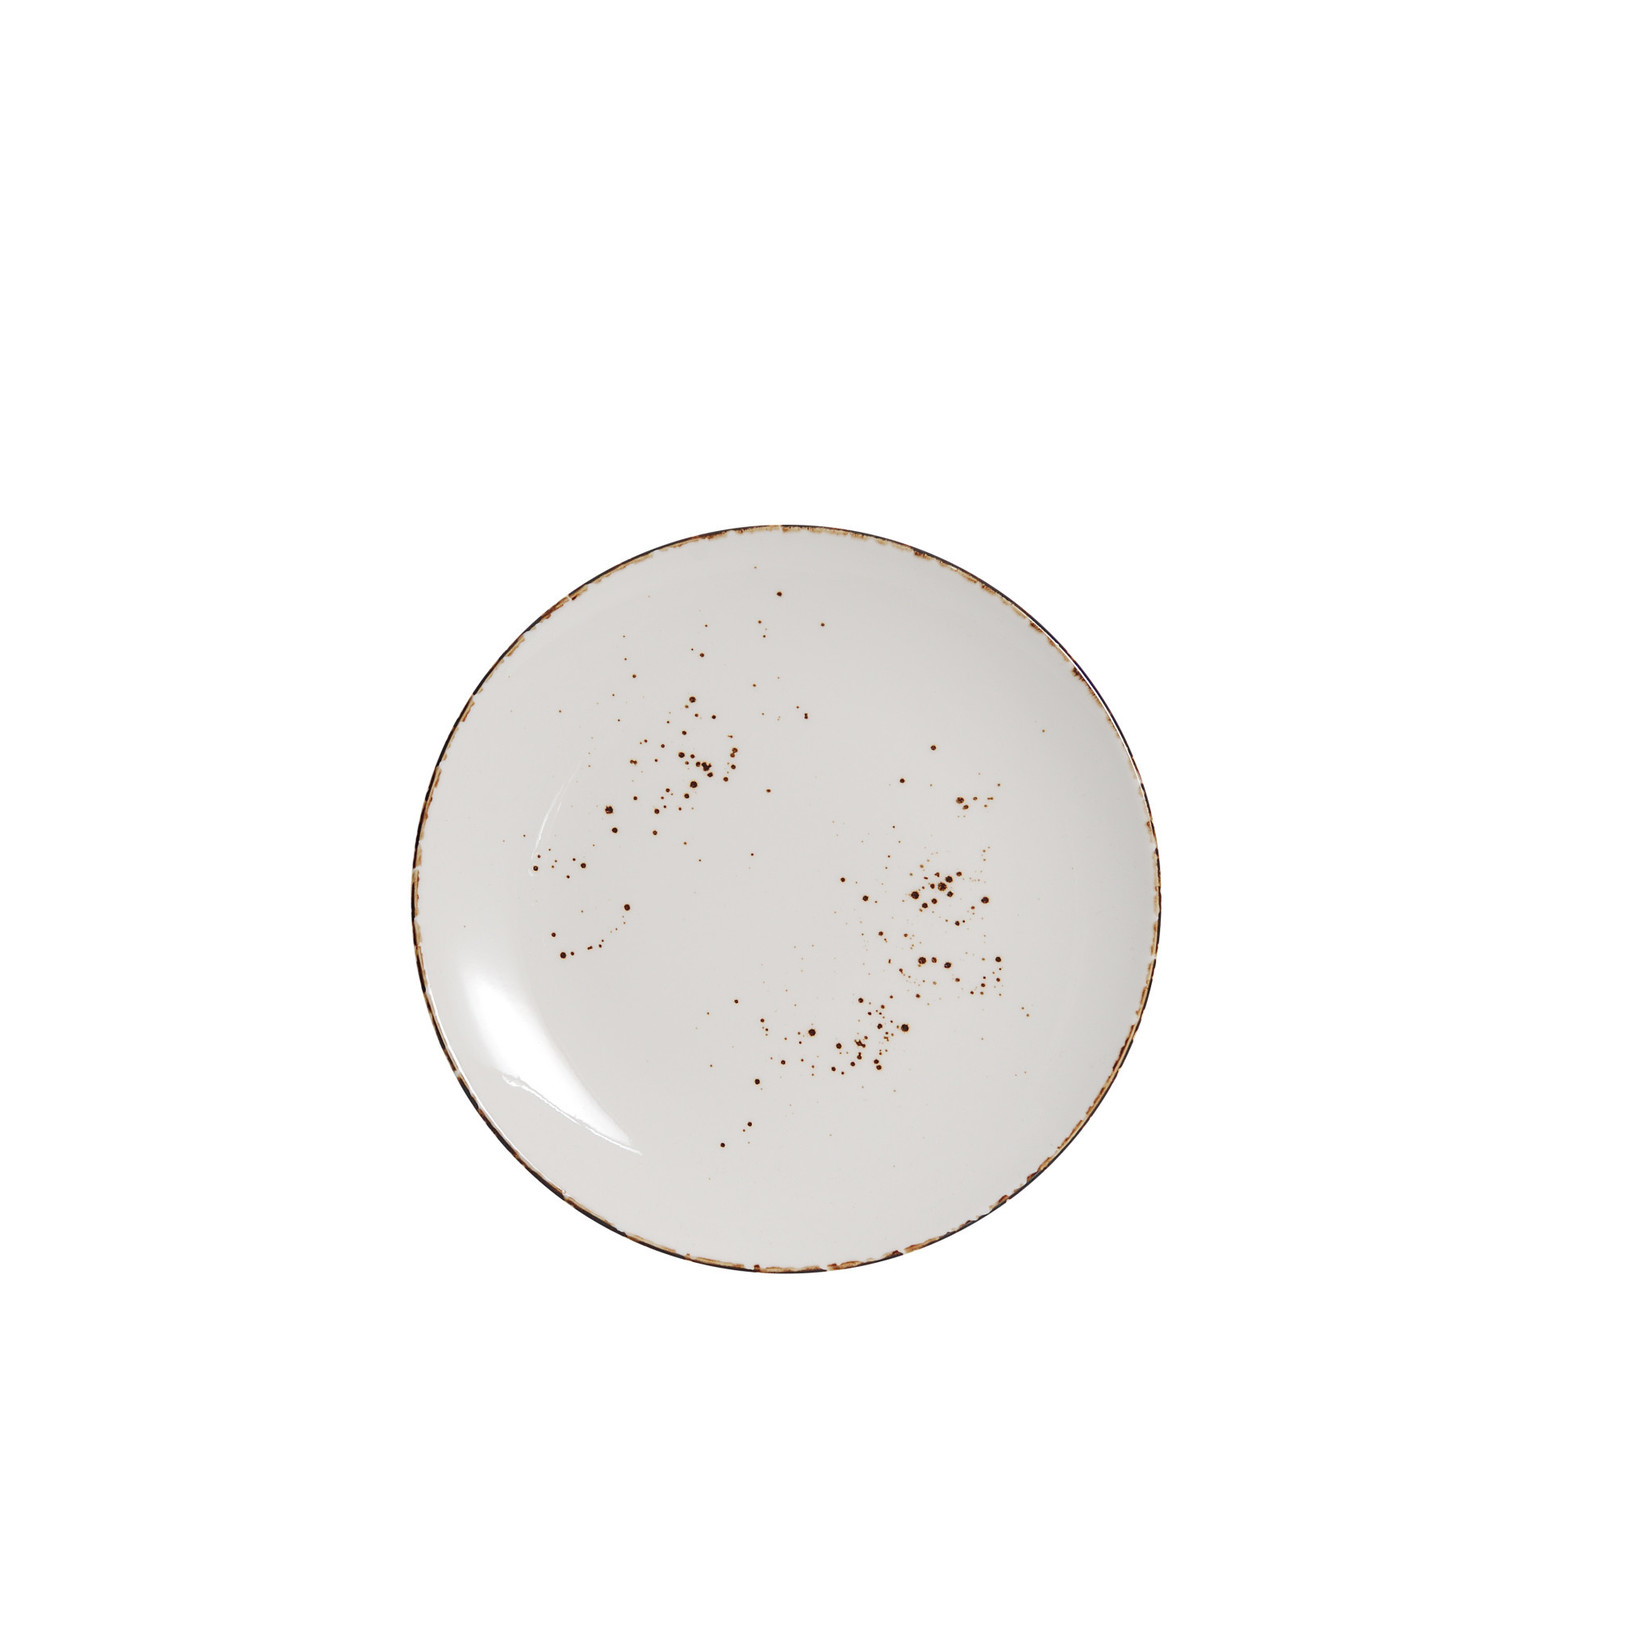 Palate and Plate AW-8742 6.25” coupe splash white 24/cs